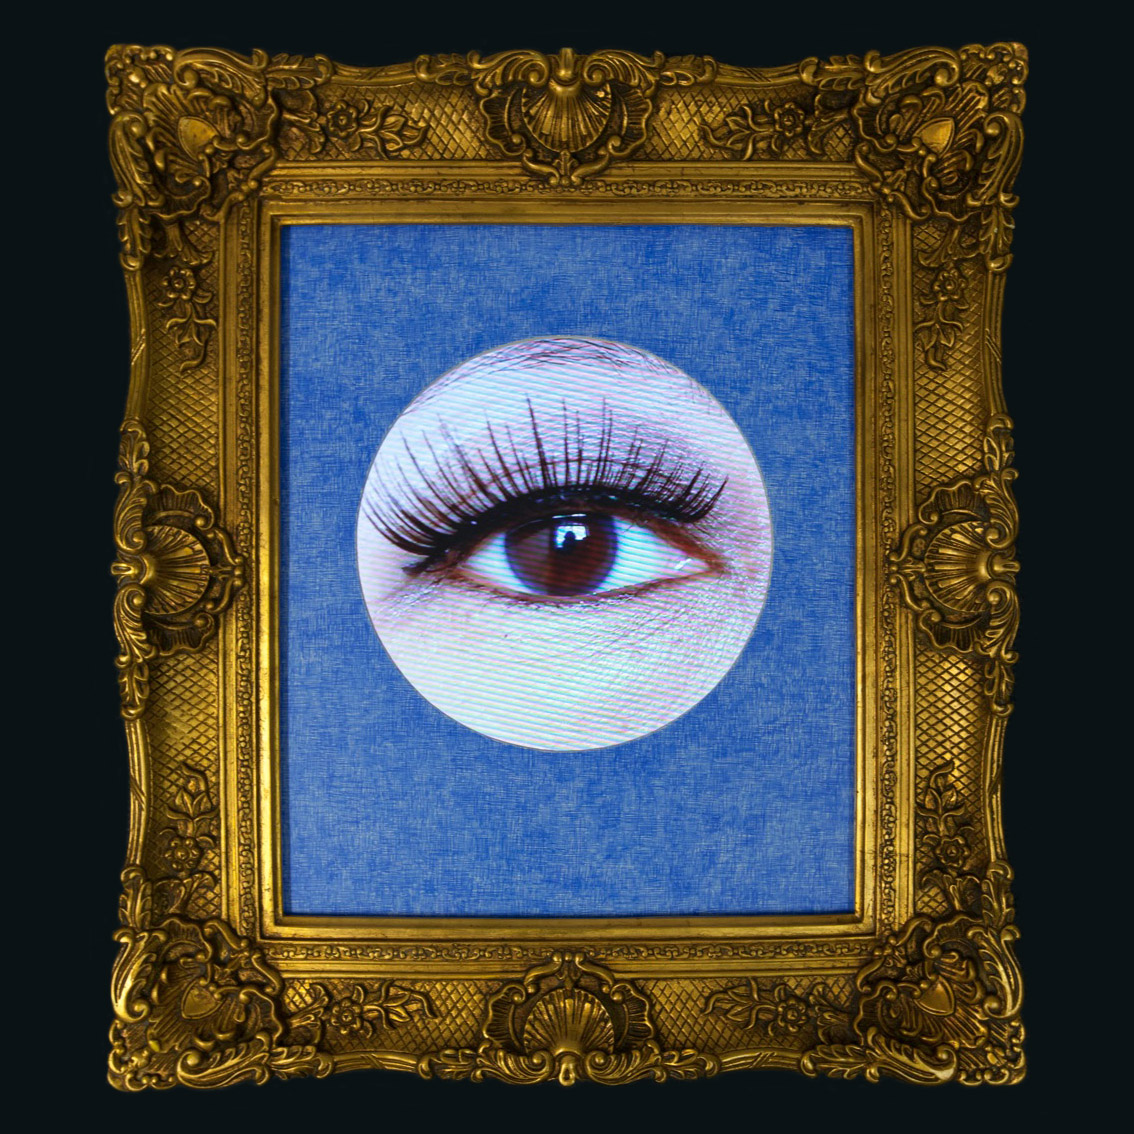 A circular cut out photo of a human eye with long lashes framed in an ornate gold-coloured picture frame.